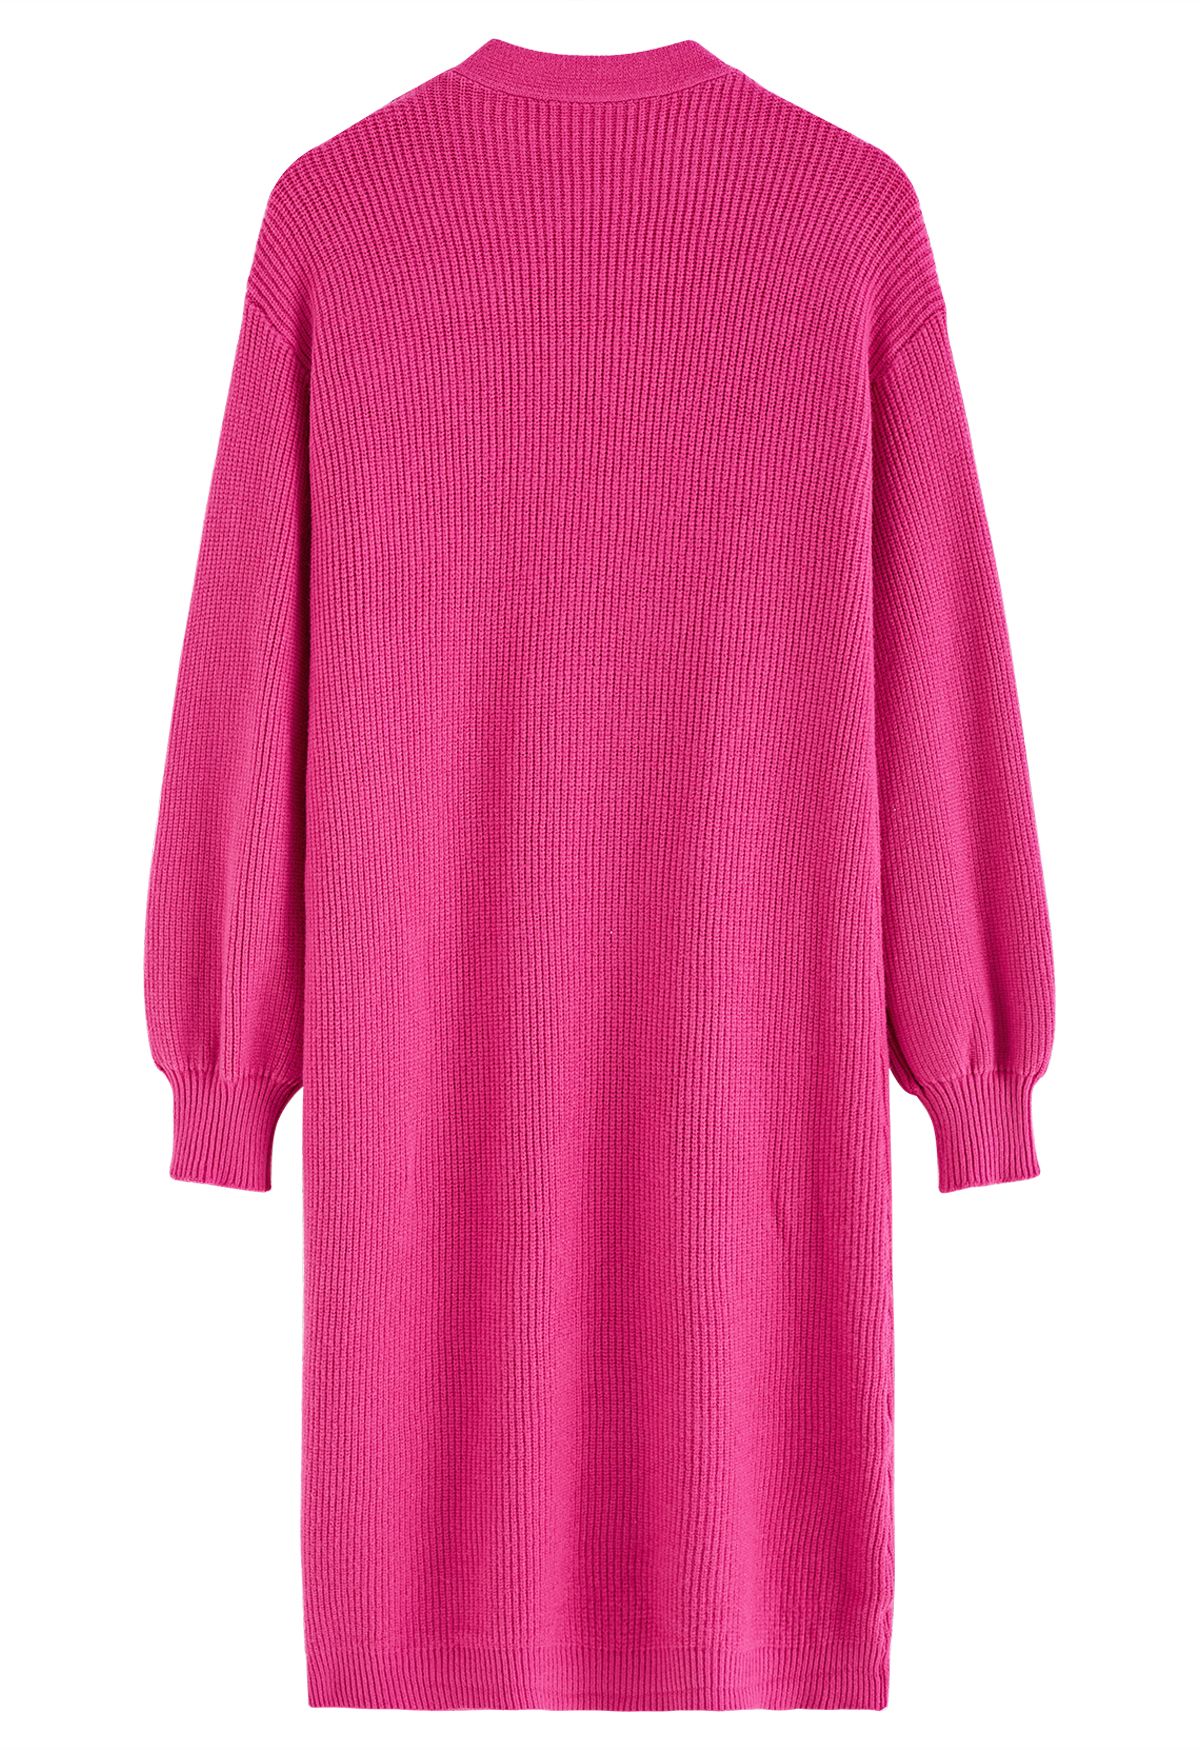 Full Ribbed Open Front Longline Cardigan in Hot Pink